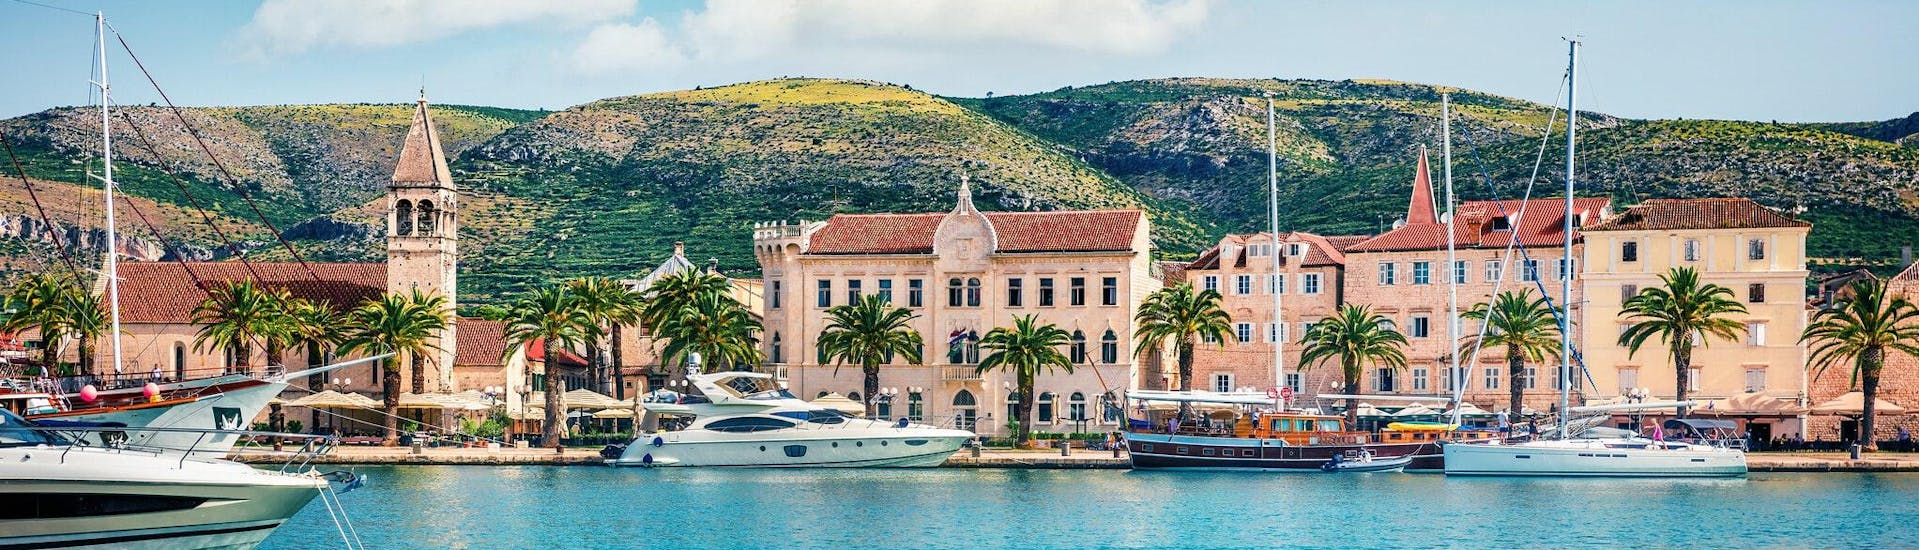 View of the port of Trogir, which is a popular starting point for boat trips in Dalmatia.